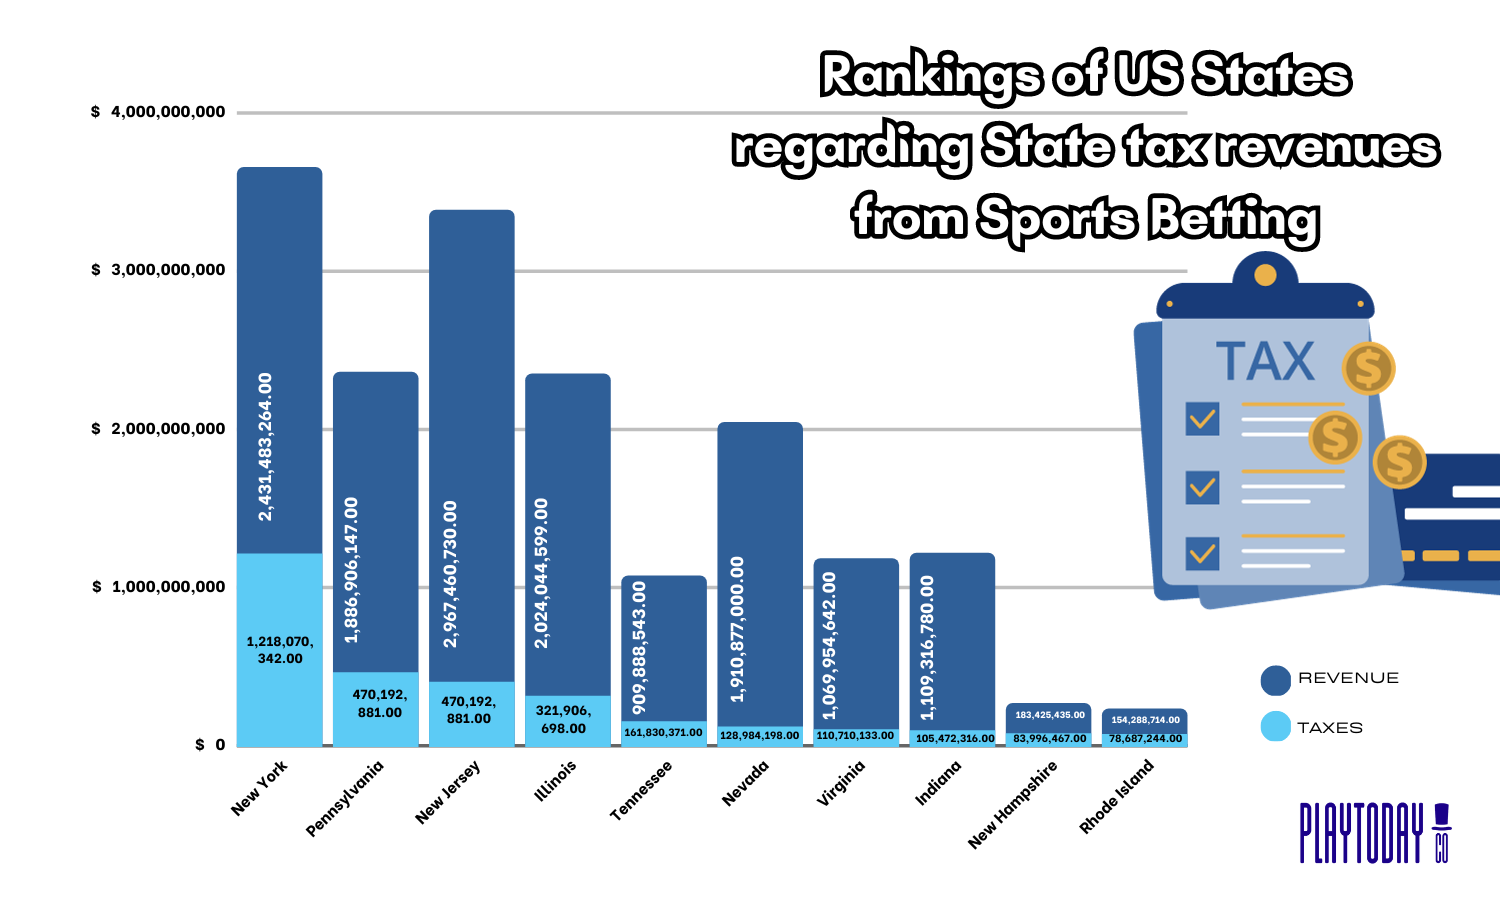 Stacked Column Graph on US State Tax Revenue Rankings